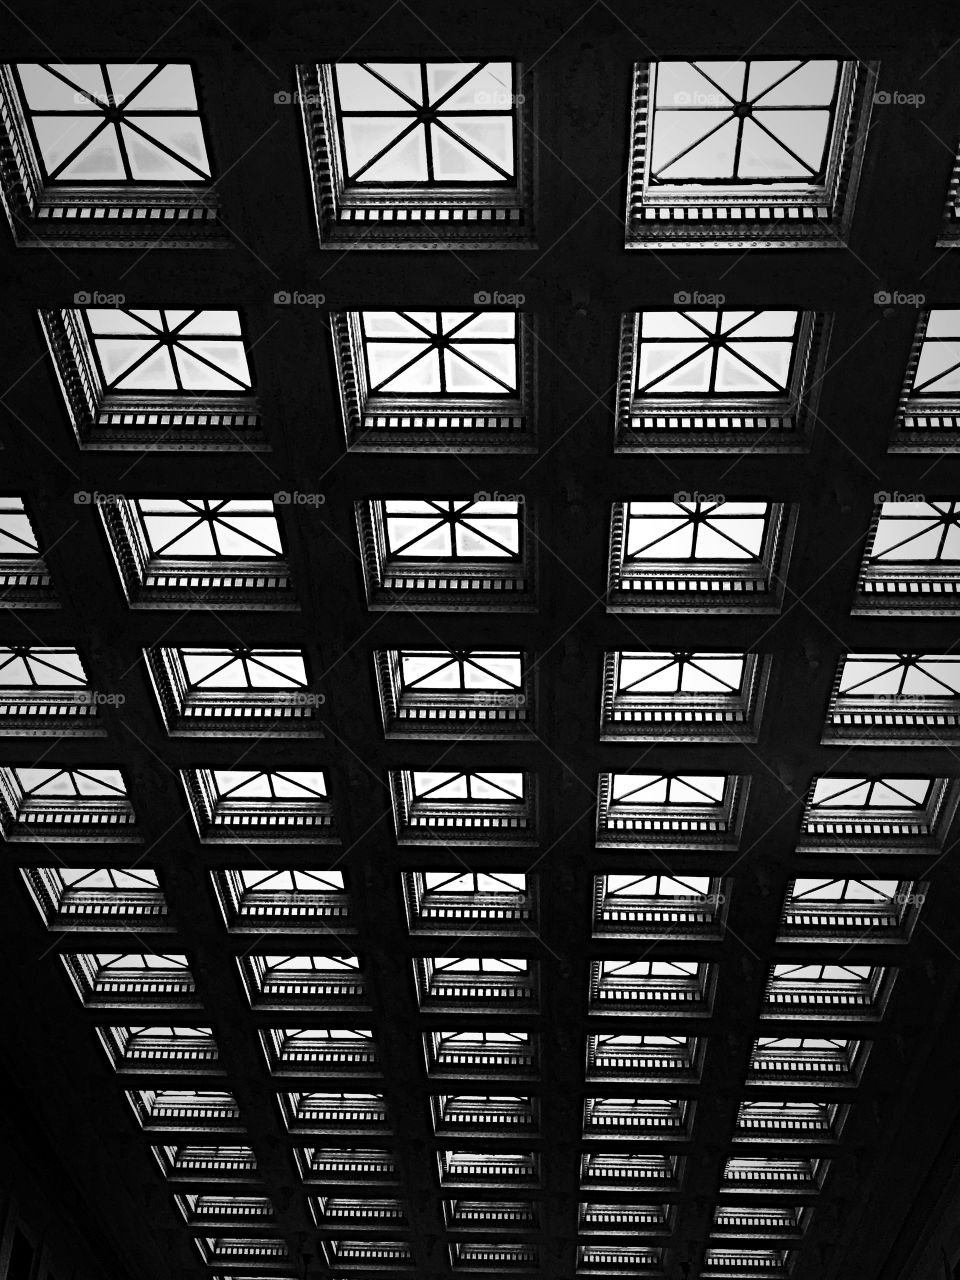 Field Museum Chicago ceiling 